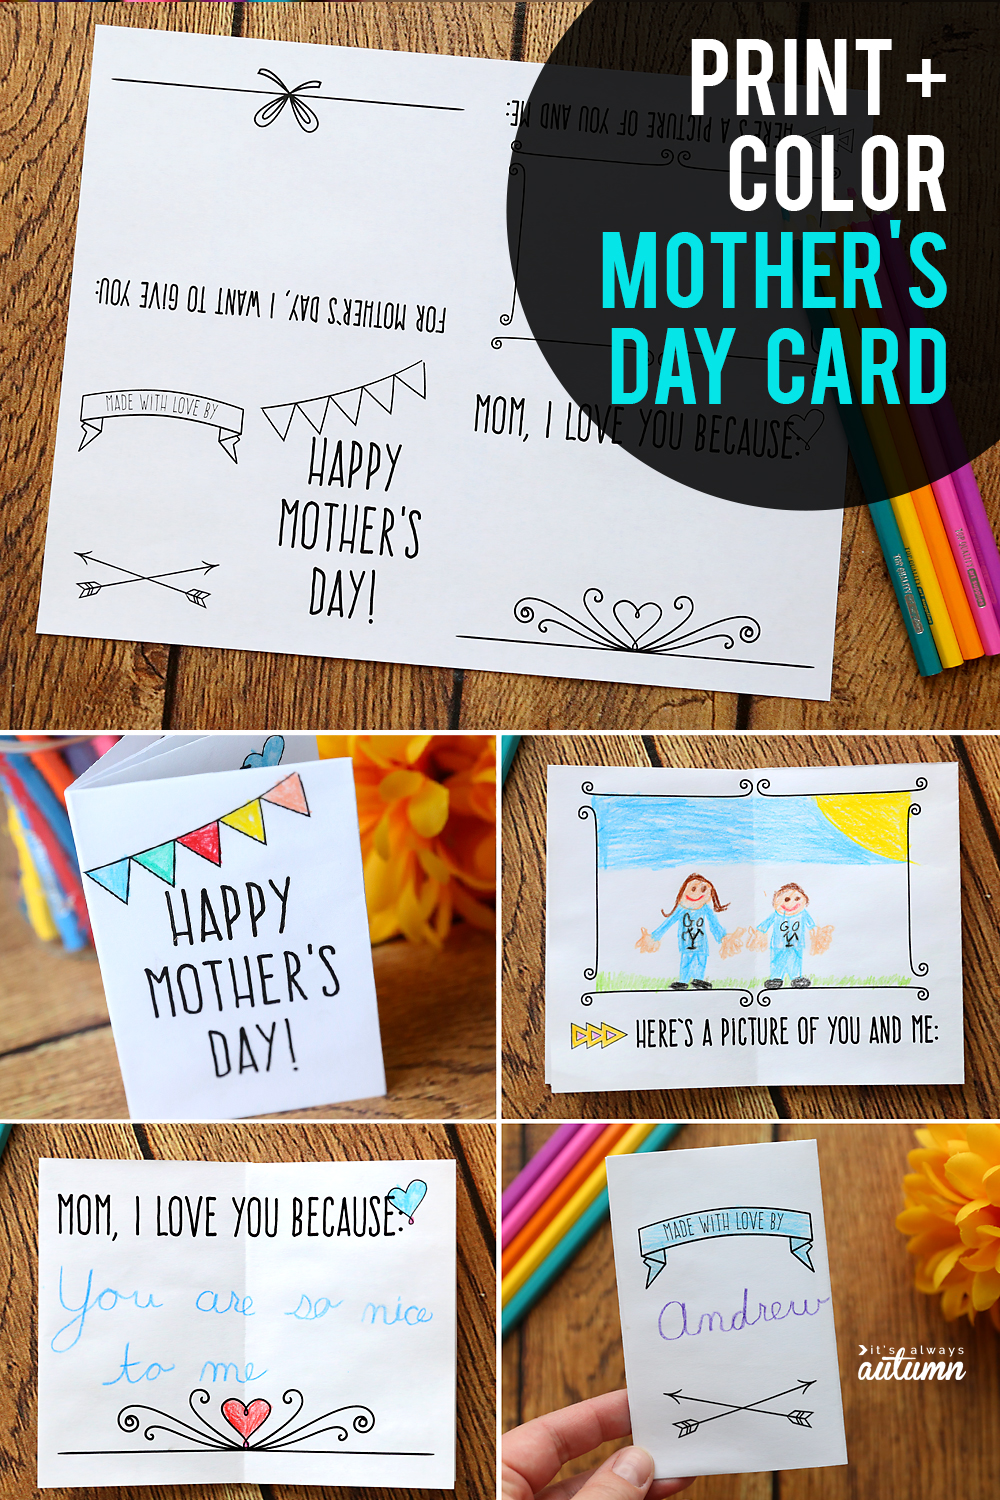 adorable-print-color-mother-s-day-card-for-kids-it-s-always-autumn